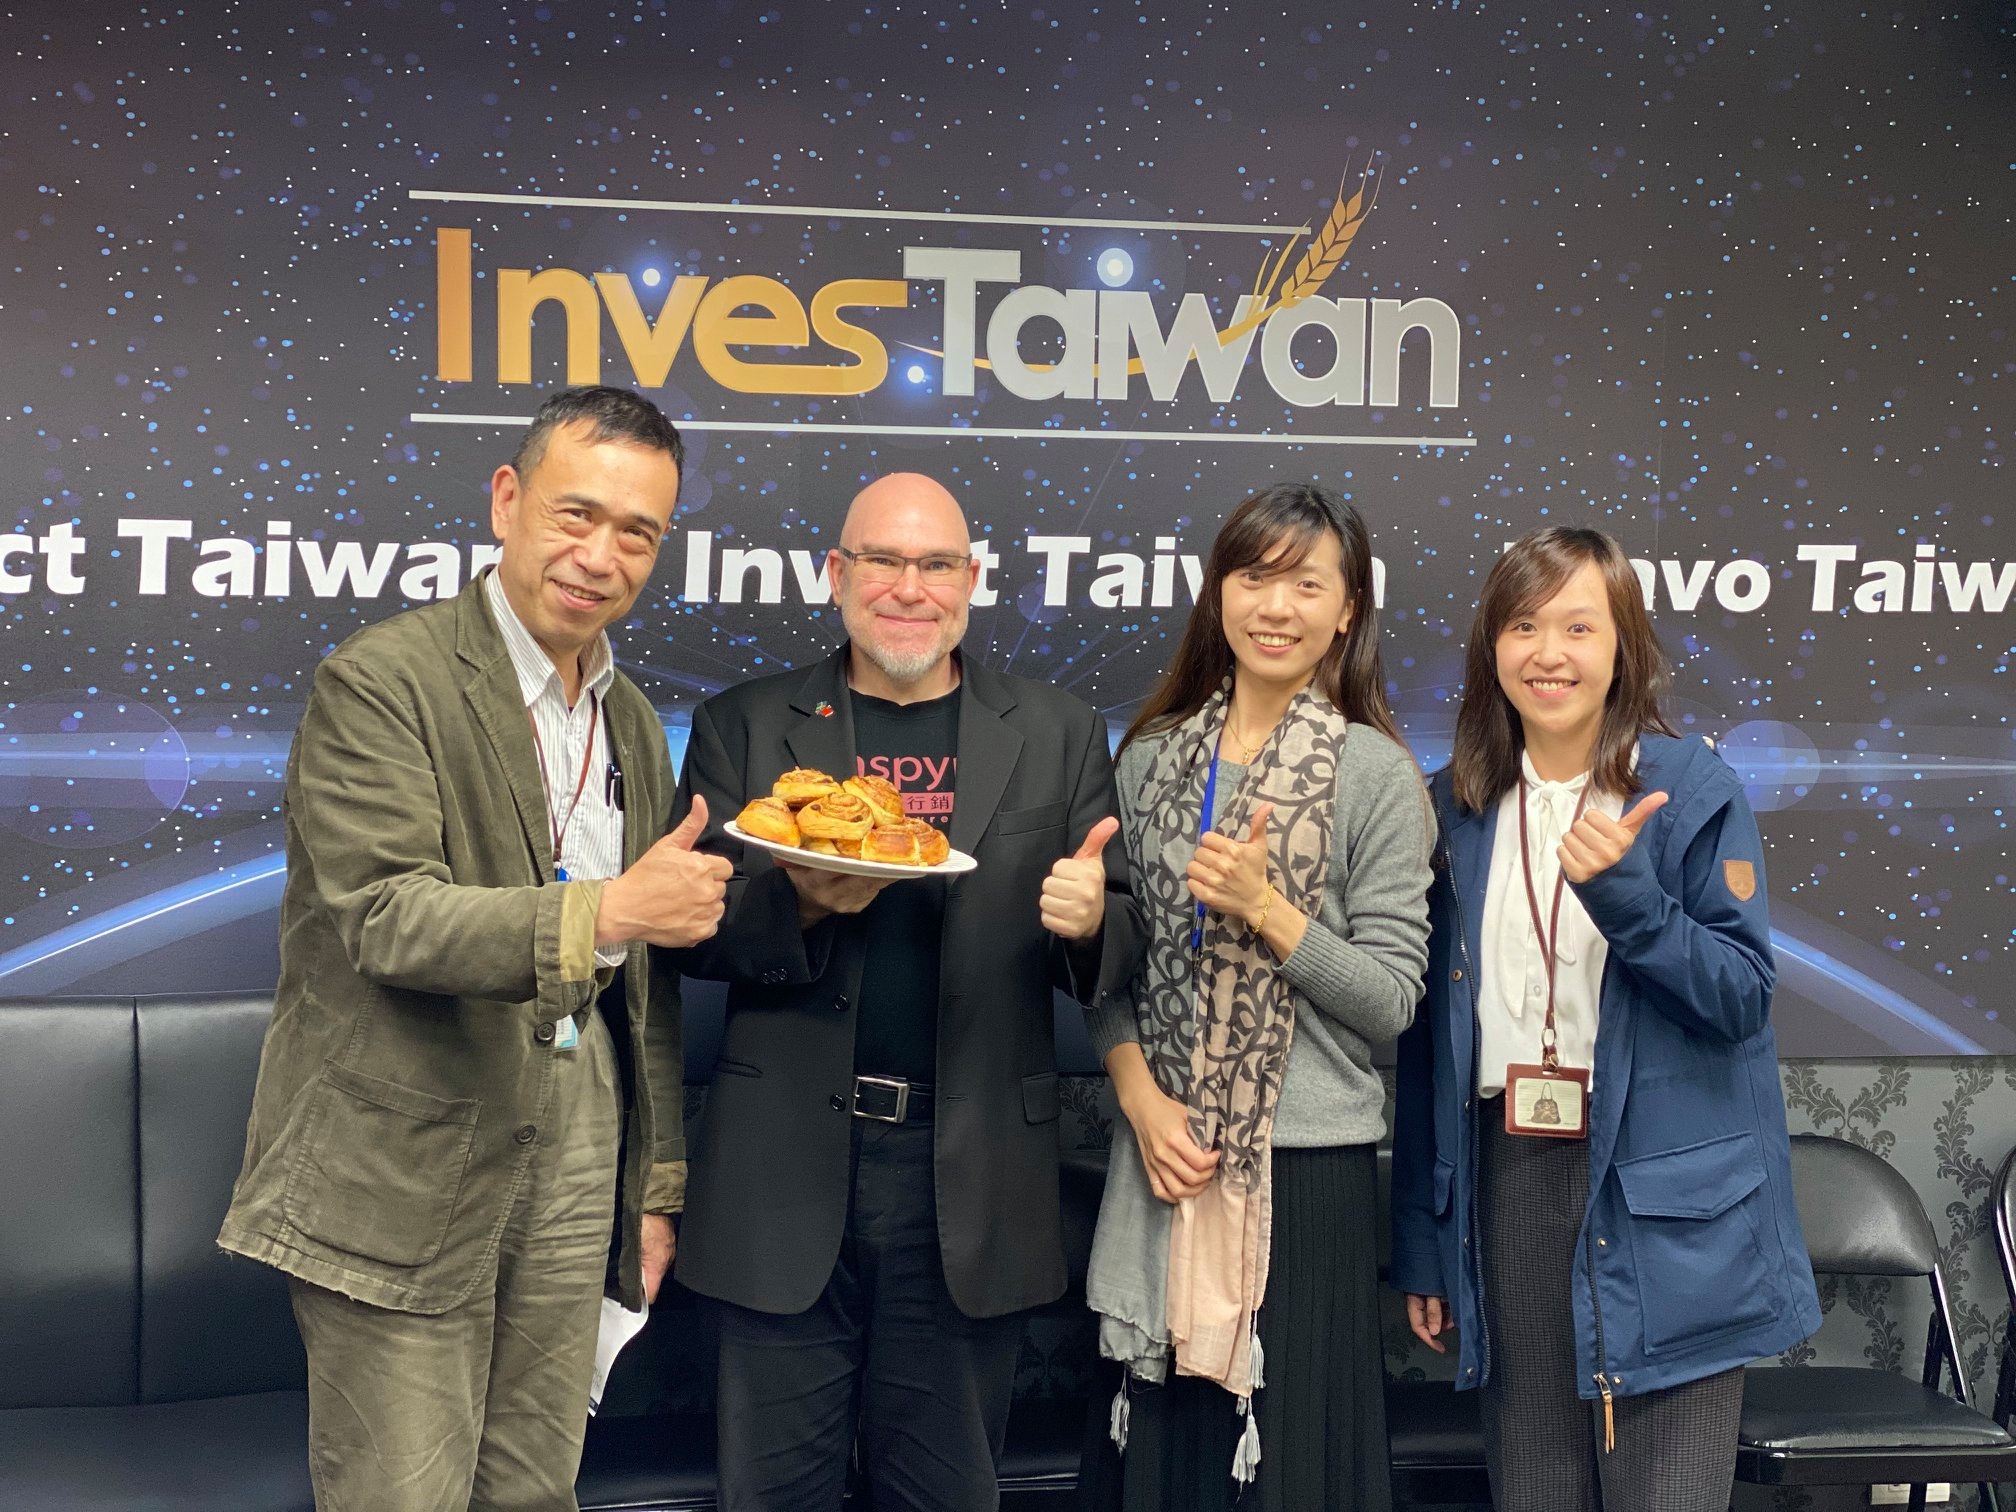 Keego Mobility with InvesTaiwan